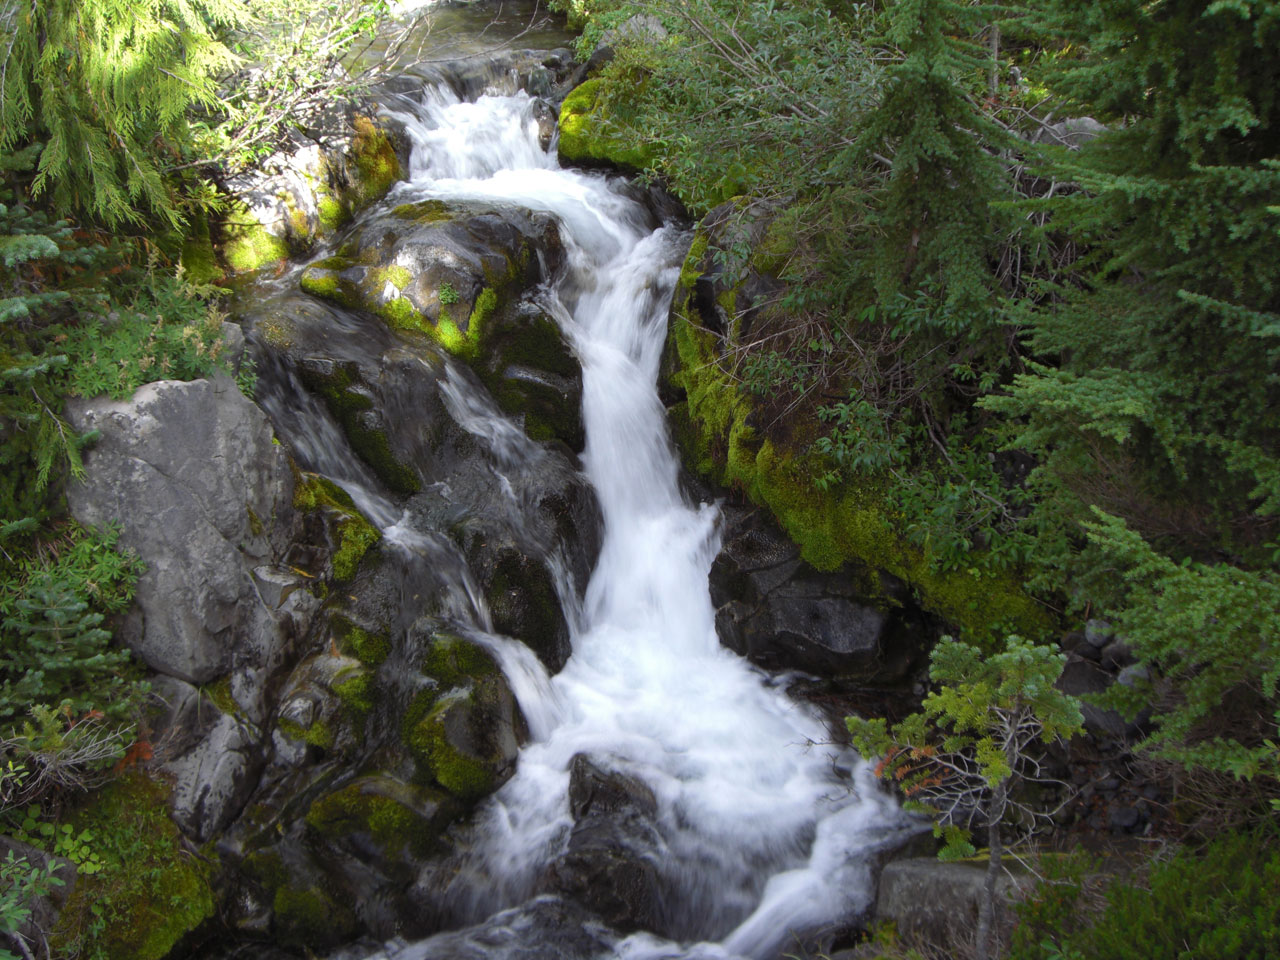 A waterfall in Paradise, Mount Rainier National Park.